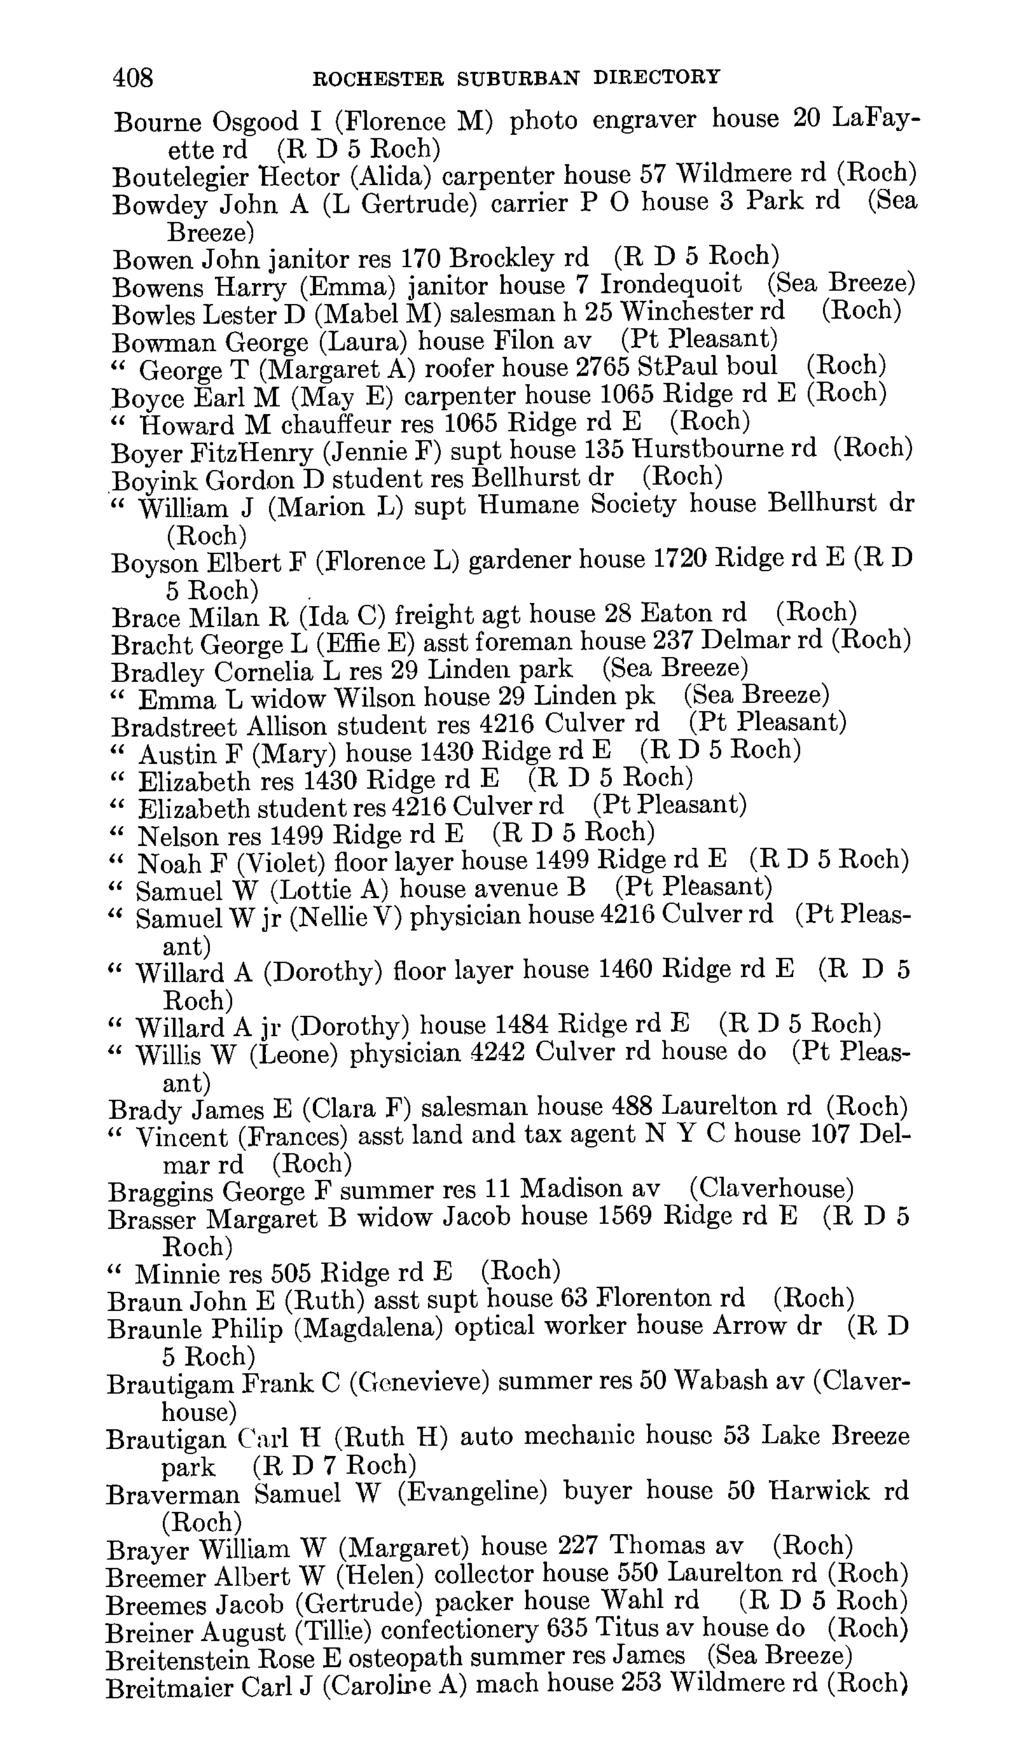 408 ROCHESTER SUBURBAN DIRECTORY Bourne Osgood I (Florence M) photo engraver house 20 LaFayette rd (R D 5 Boutelegier Hector (Alida) carpenter house 57 Wildmere rd Bowdey John A (L Gertrude) carrier